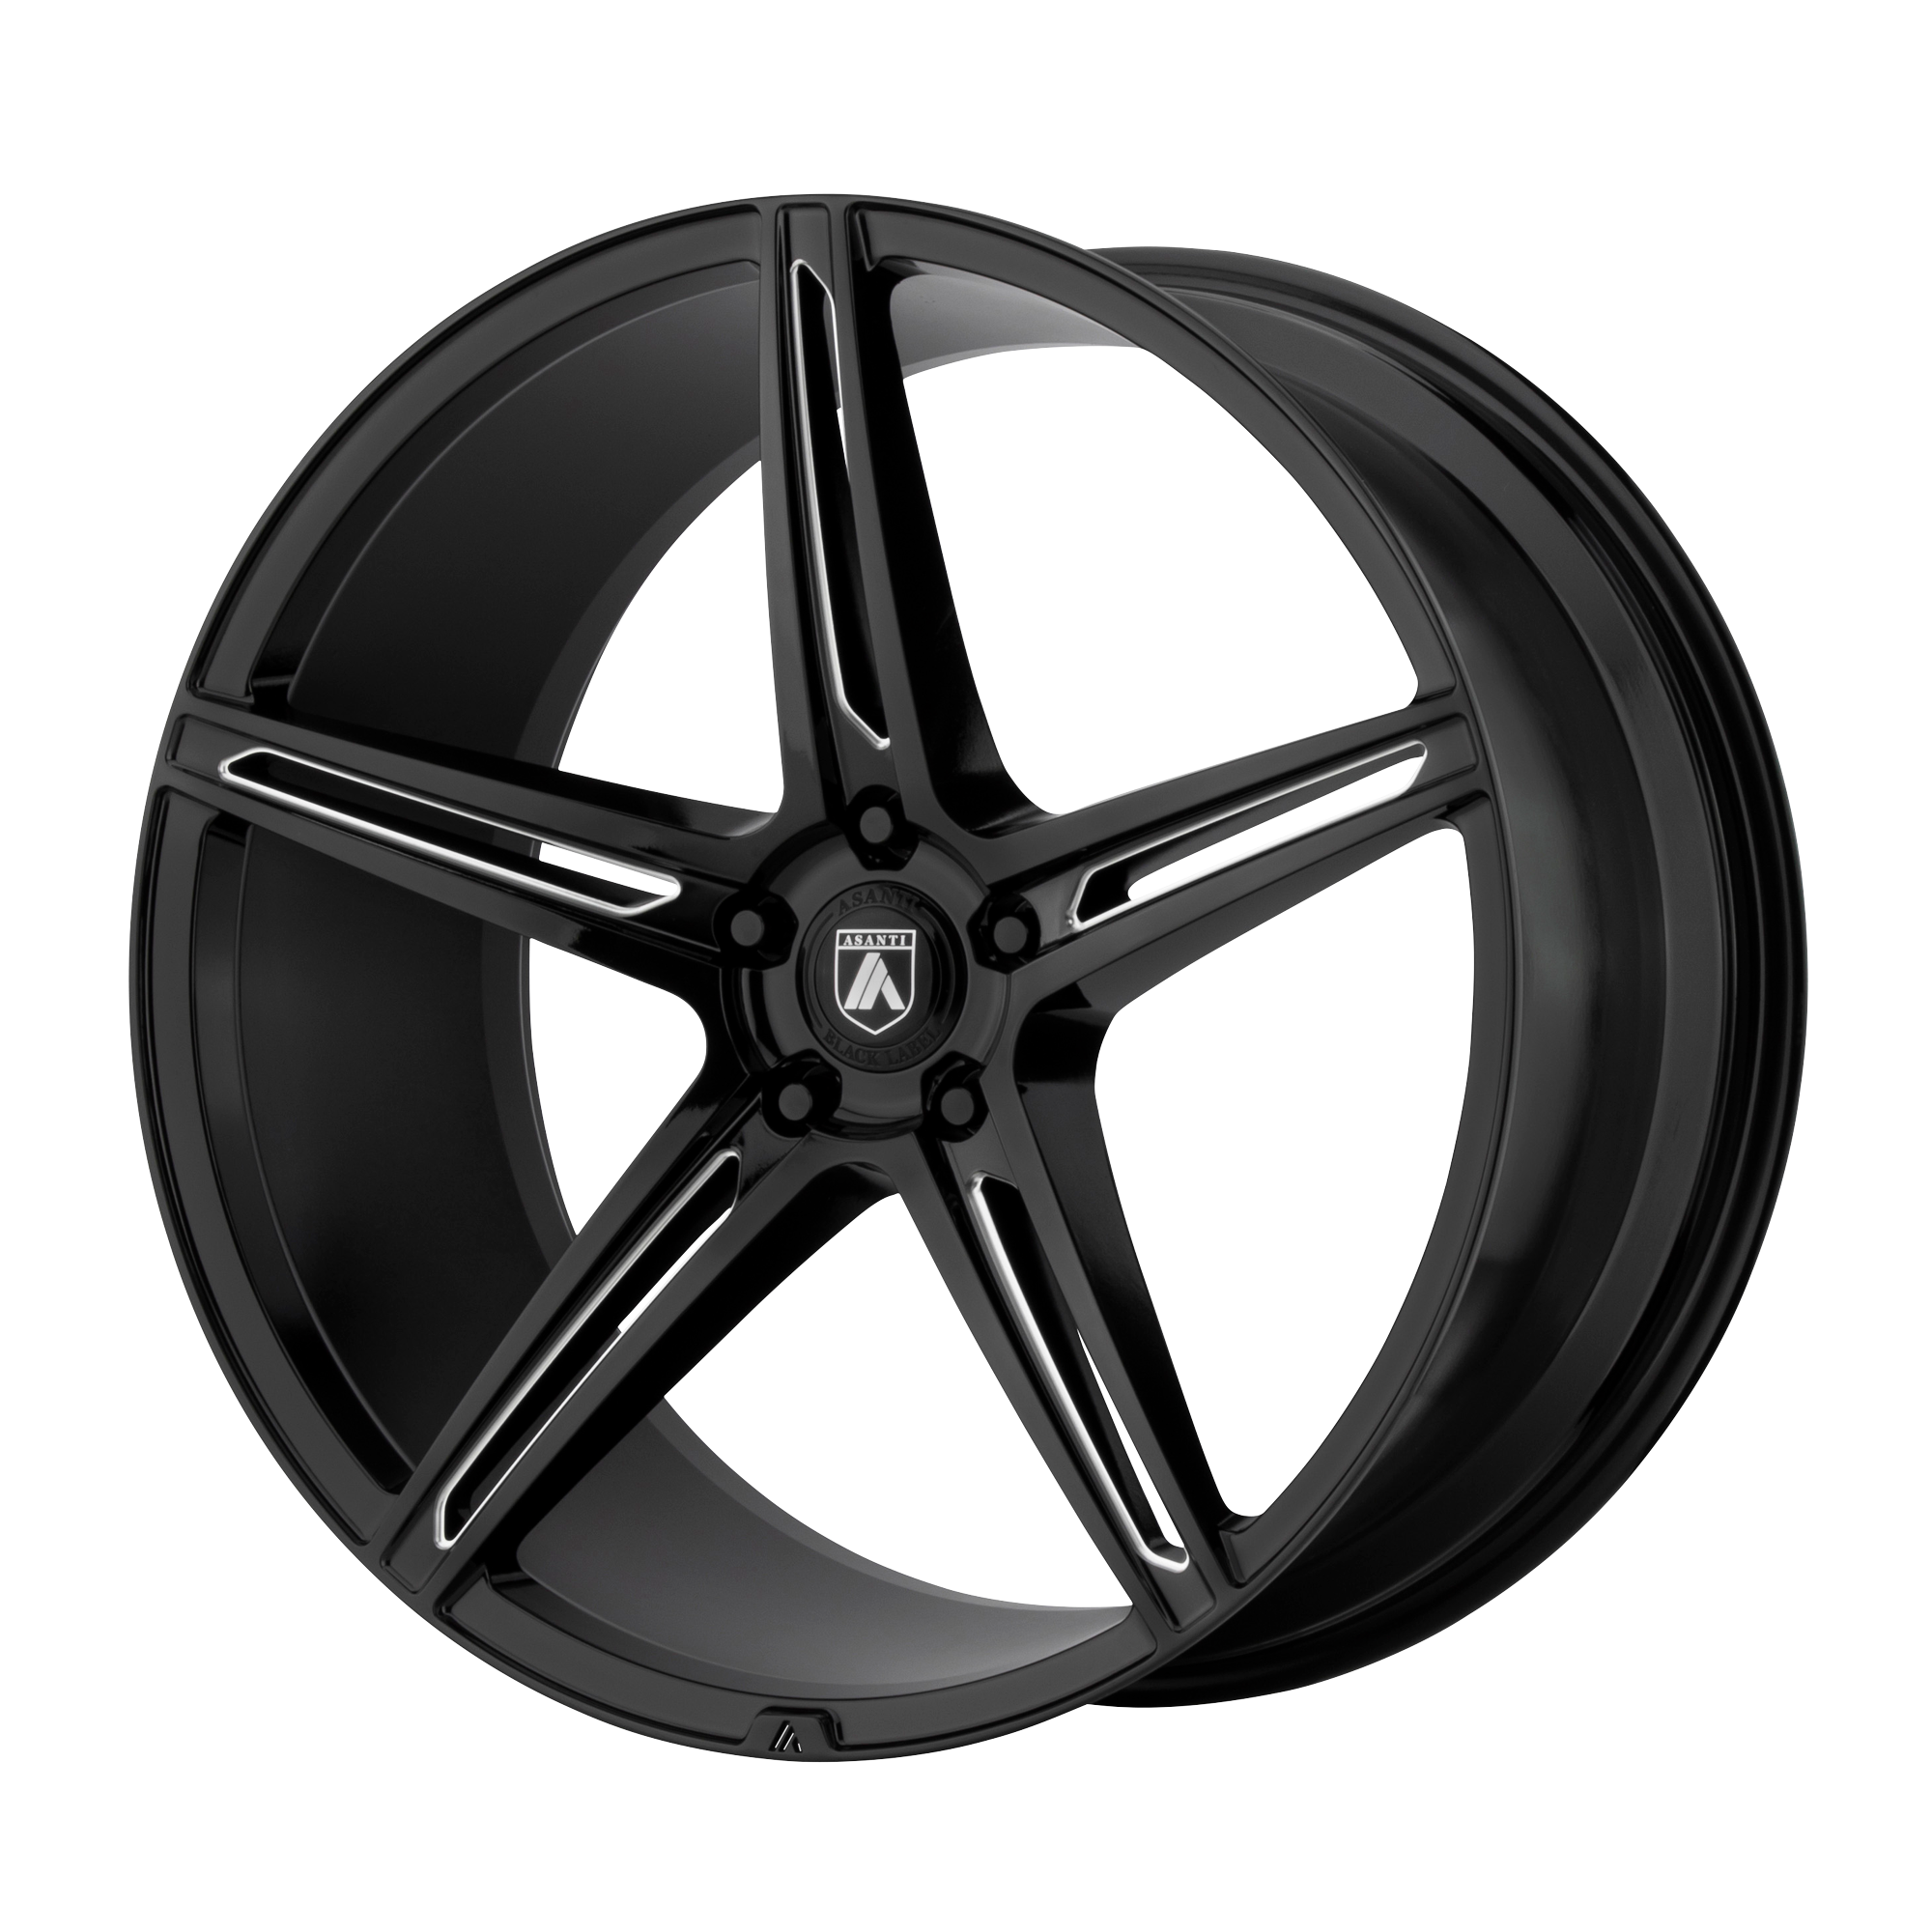 ALPHA 5 22x10.5 5x120.00 GLOSS BLACK MILLED (35 mm) - Tires and Engine Performance